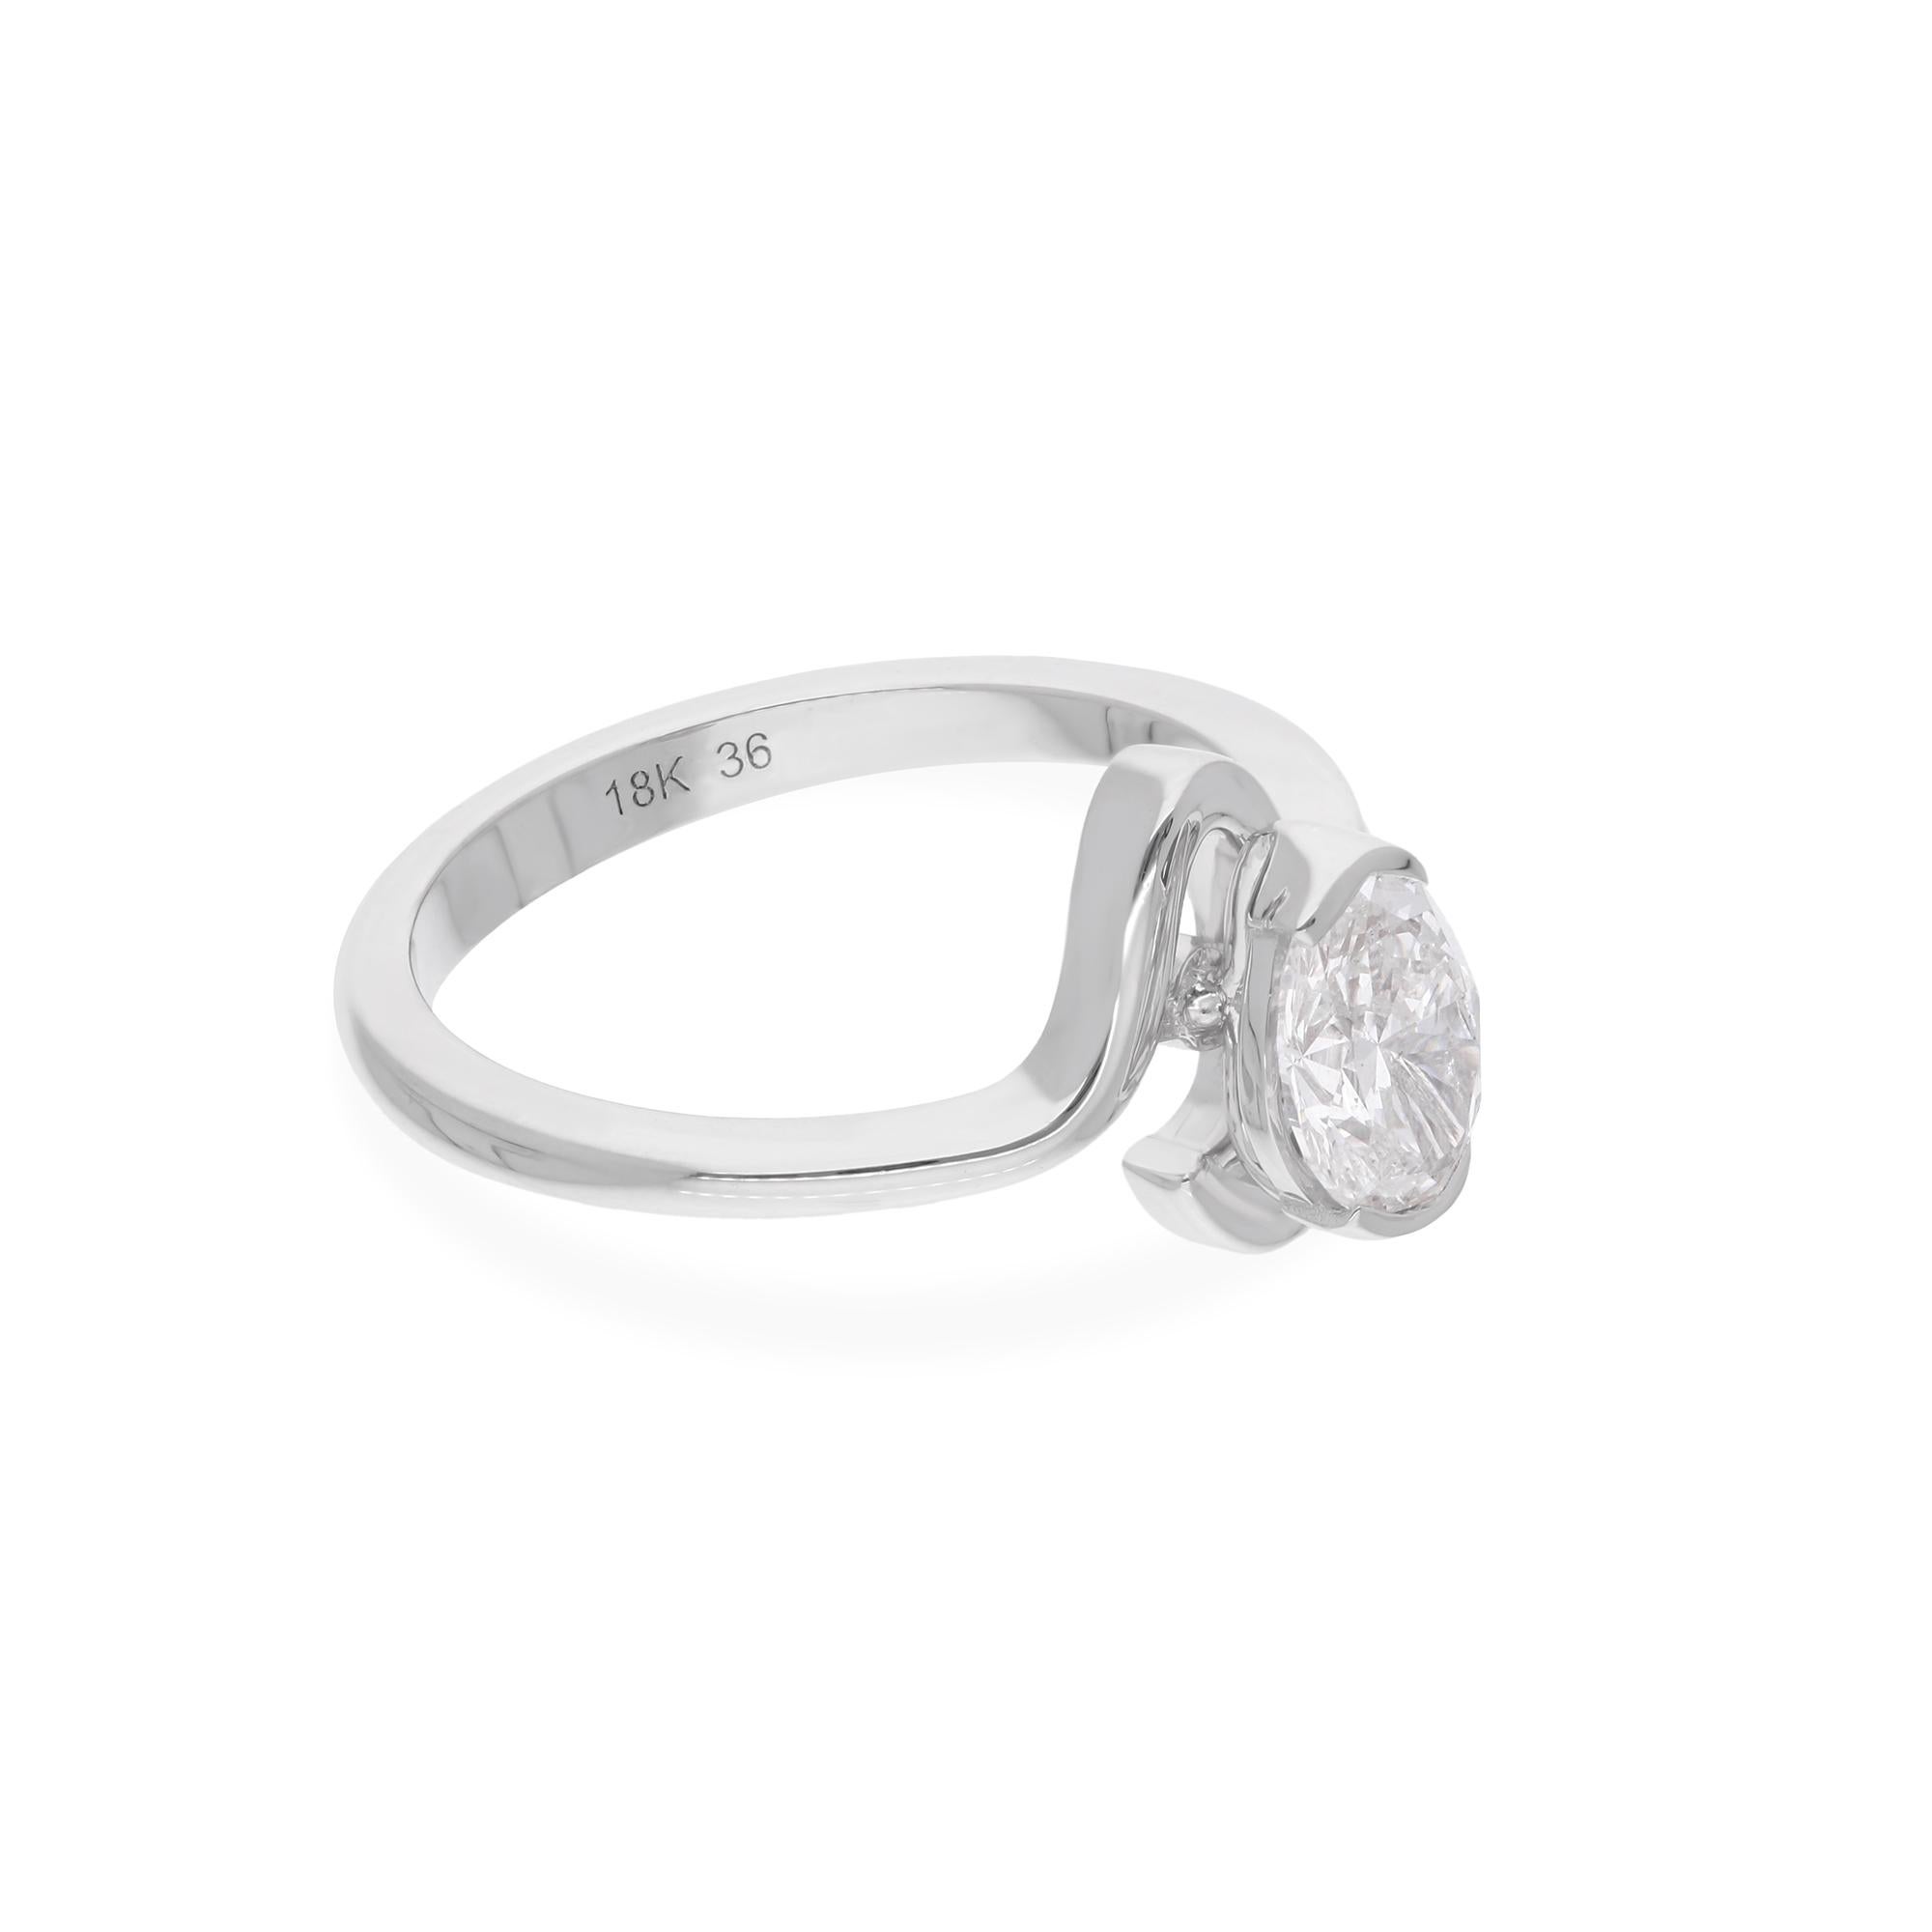 Enhancing its allure is the impeccable clarity of the diamond, graded as SI (Slightly Included), ensuring that the stone is free from any visible imperfections to the naked eye, allowing its natural beauty to shine through effortlessly.

Item Code